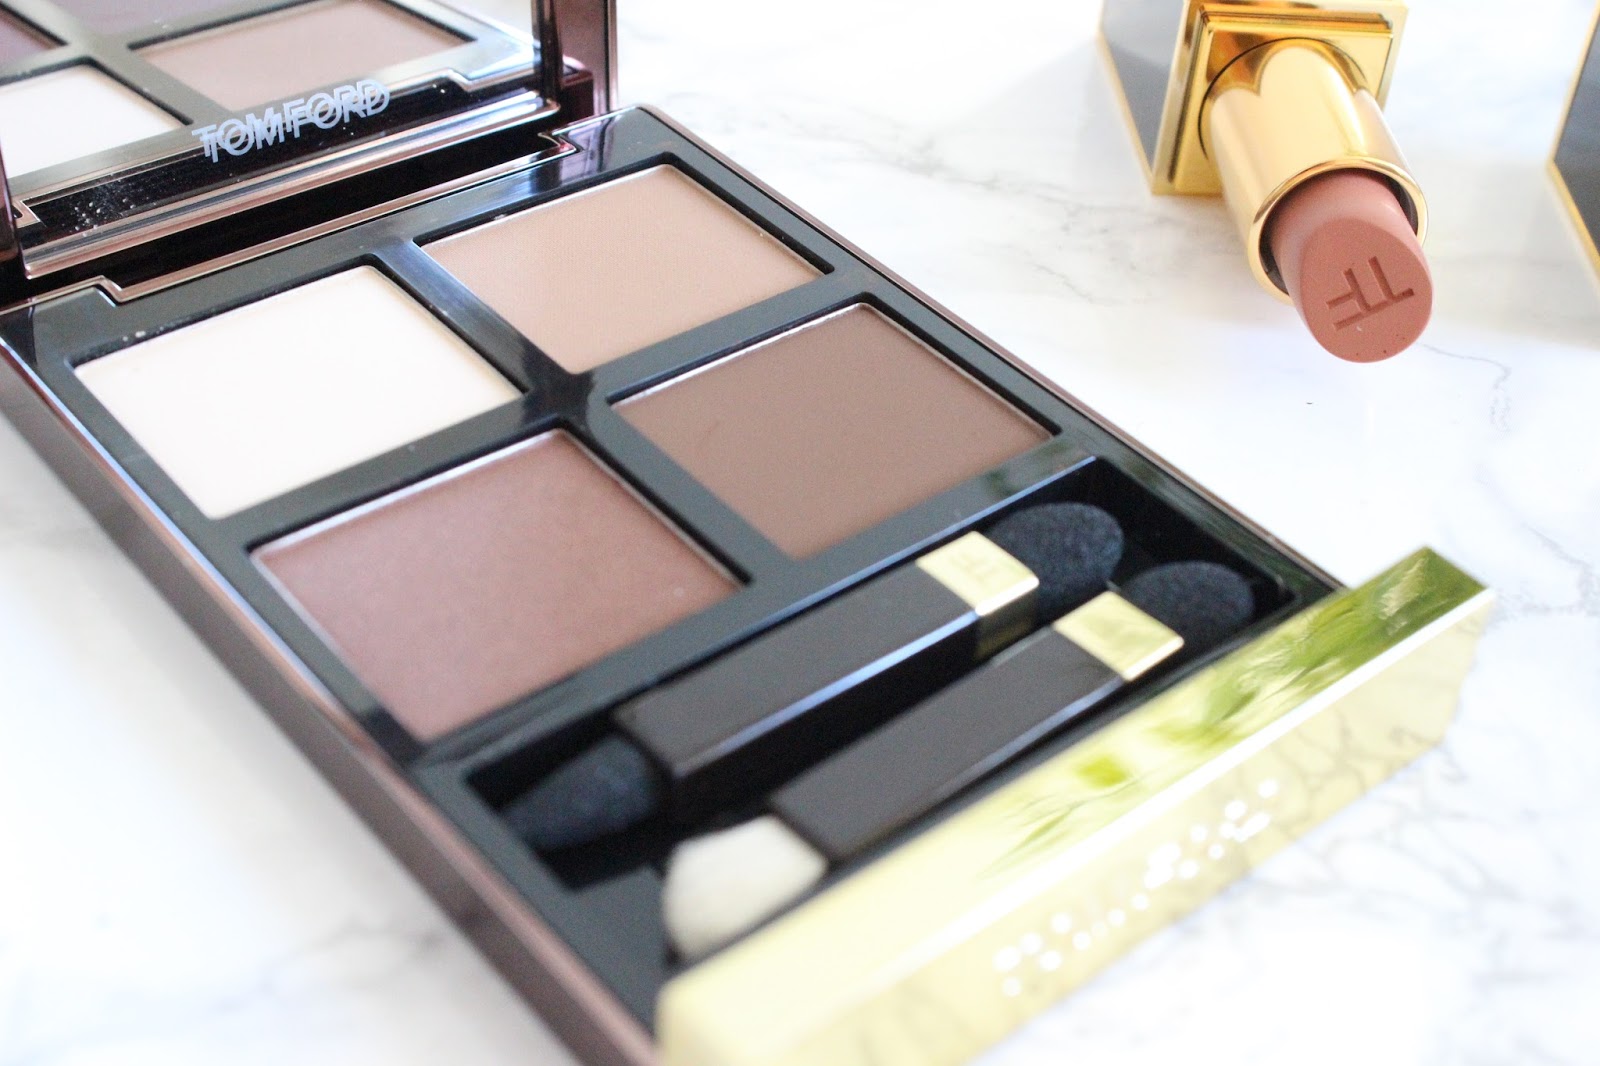 Tom Ford Eyeshadow Quad in Cocoa Mirage 